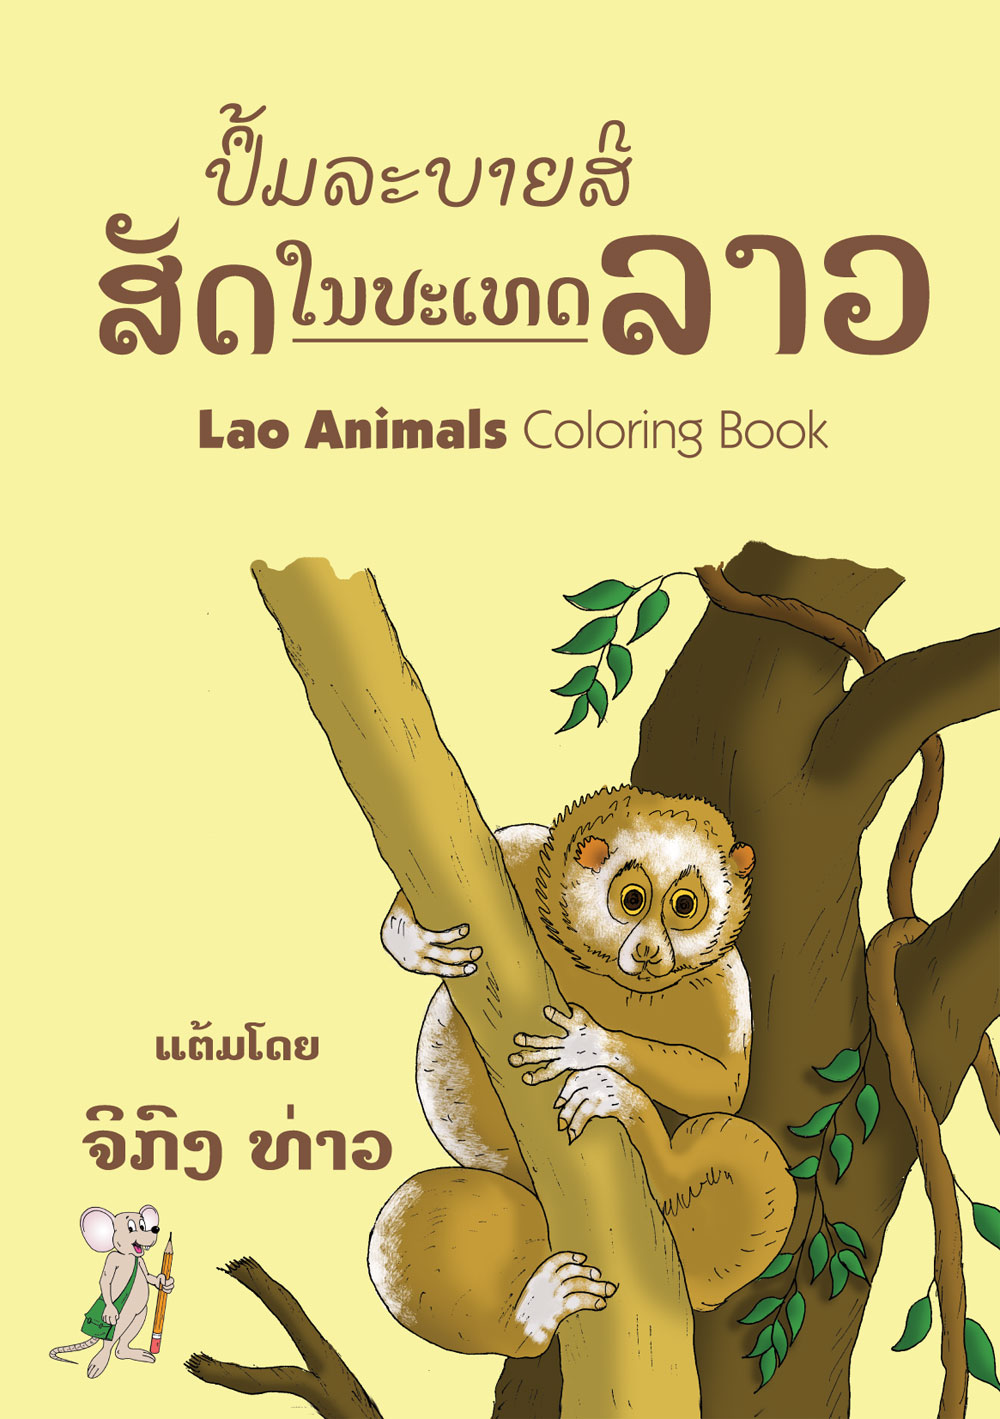 Lao Animals Coloring Book large book cover, published in Lao and English